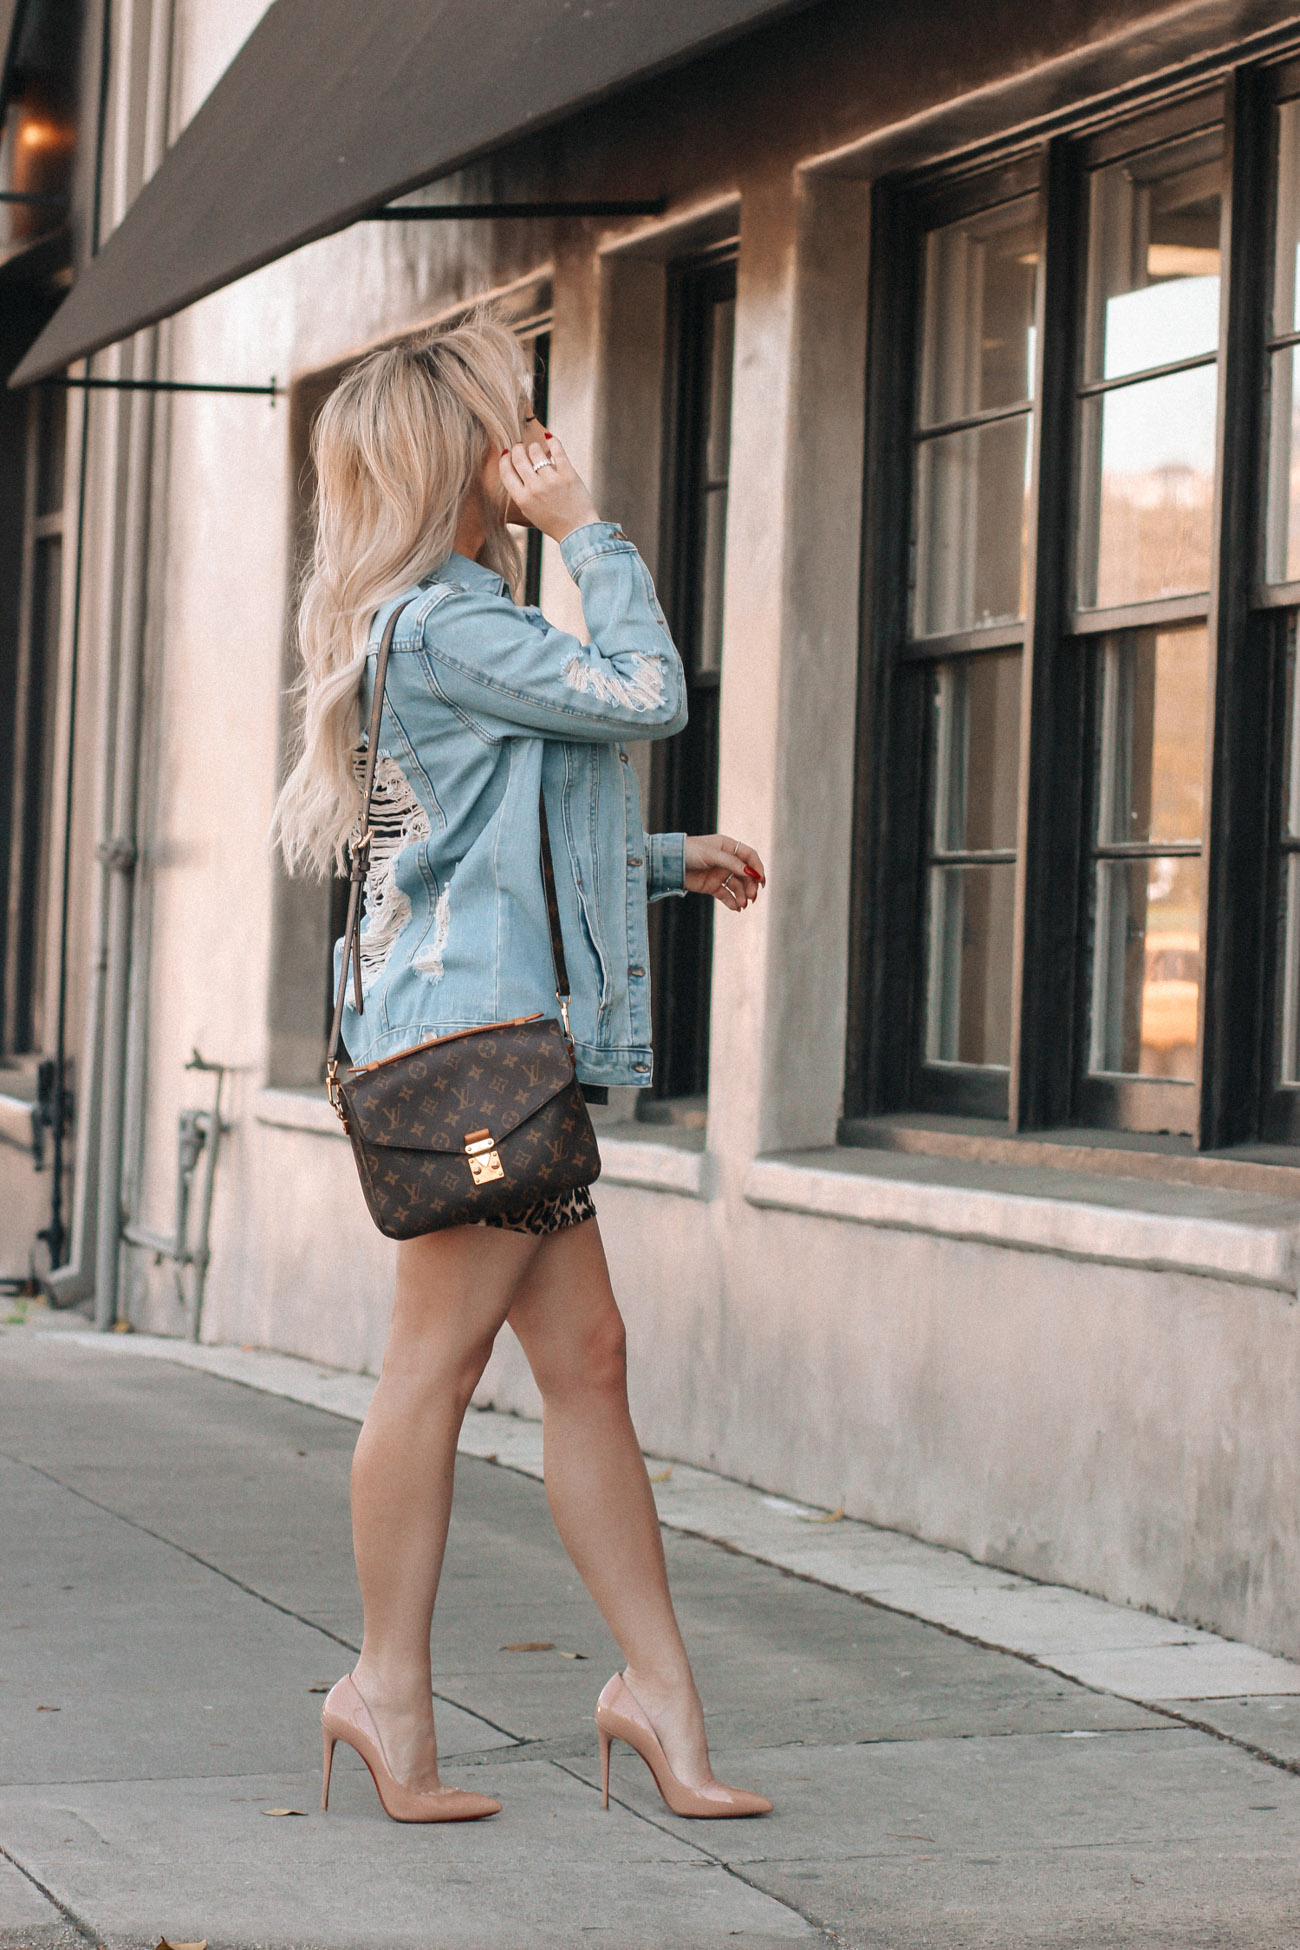 A Leopard Moment | Denim Jacket | Cheetah | Nude Louboutins | Beverly Hills | Blondie in the City by Hayley Larue